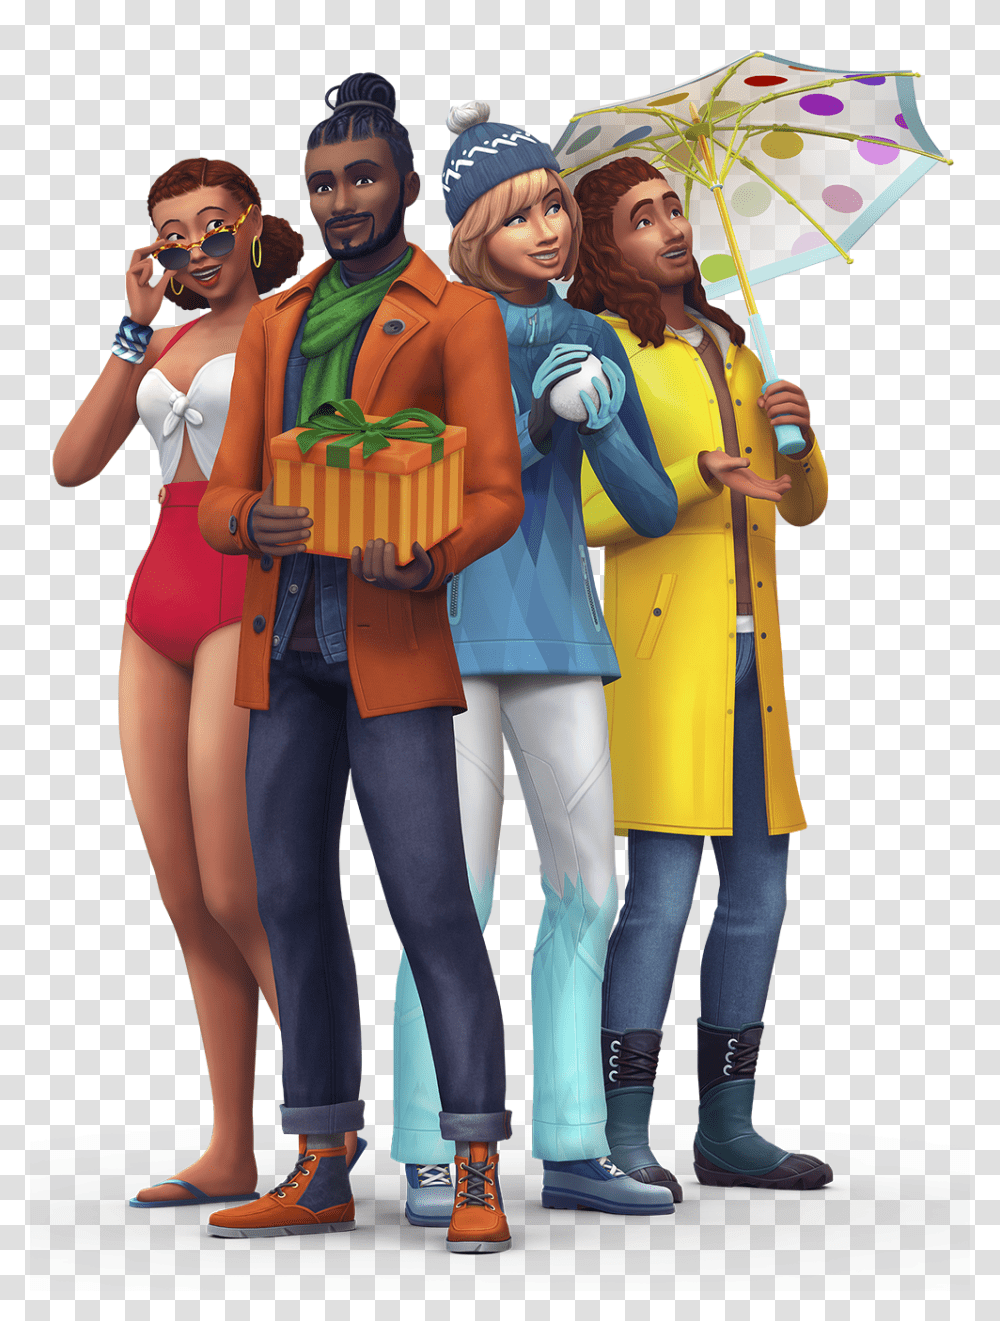 The Sims Seasons Official Logo Box Art And Renders Simsvip, Person, Shoe, Footwear Transparent Png